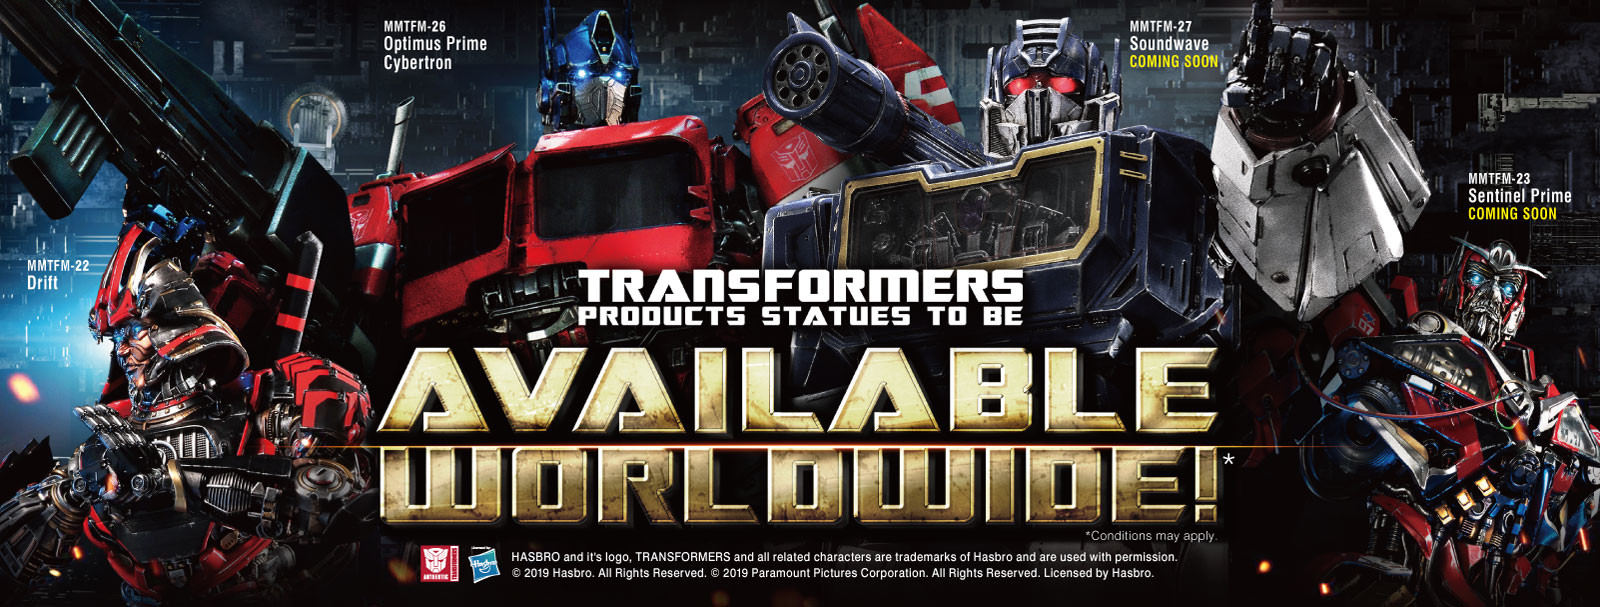 Transformers Statues are now available Worldwide